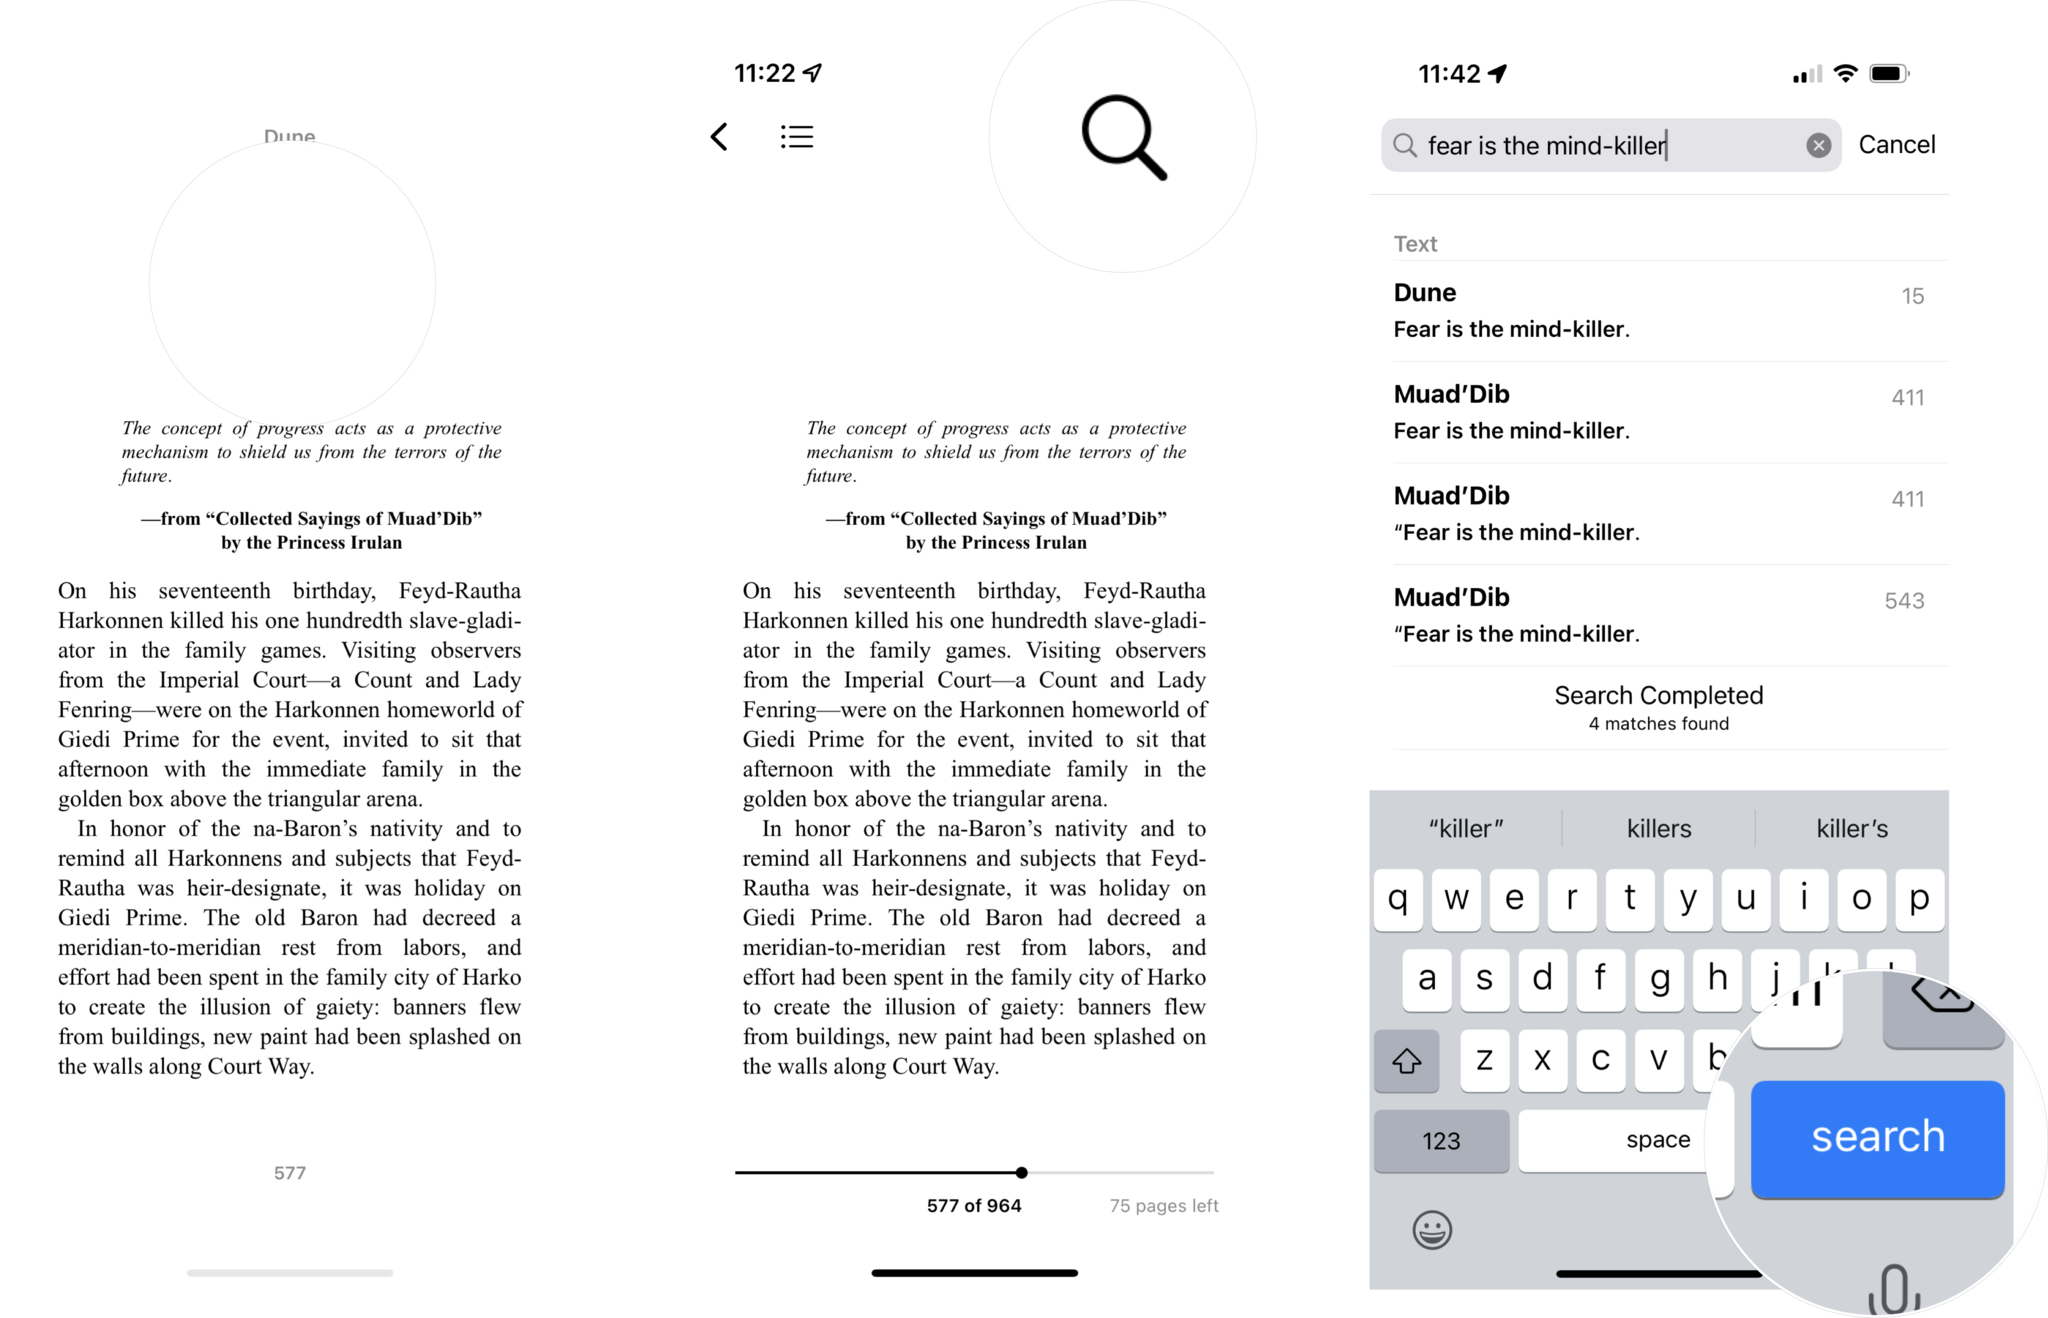 How to find text in a book in Apple Books: tap a blank part of the page to bring up the controls, tap the magnifying glass icon, enter your search text and tap Search